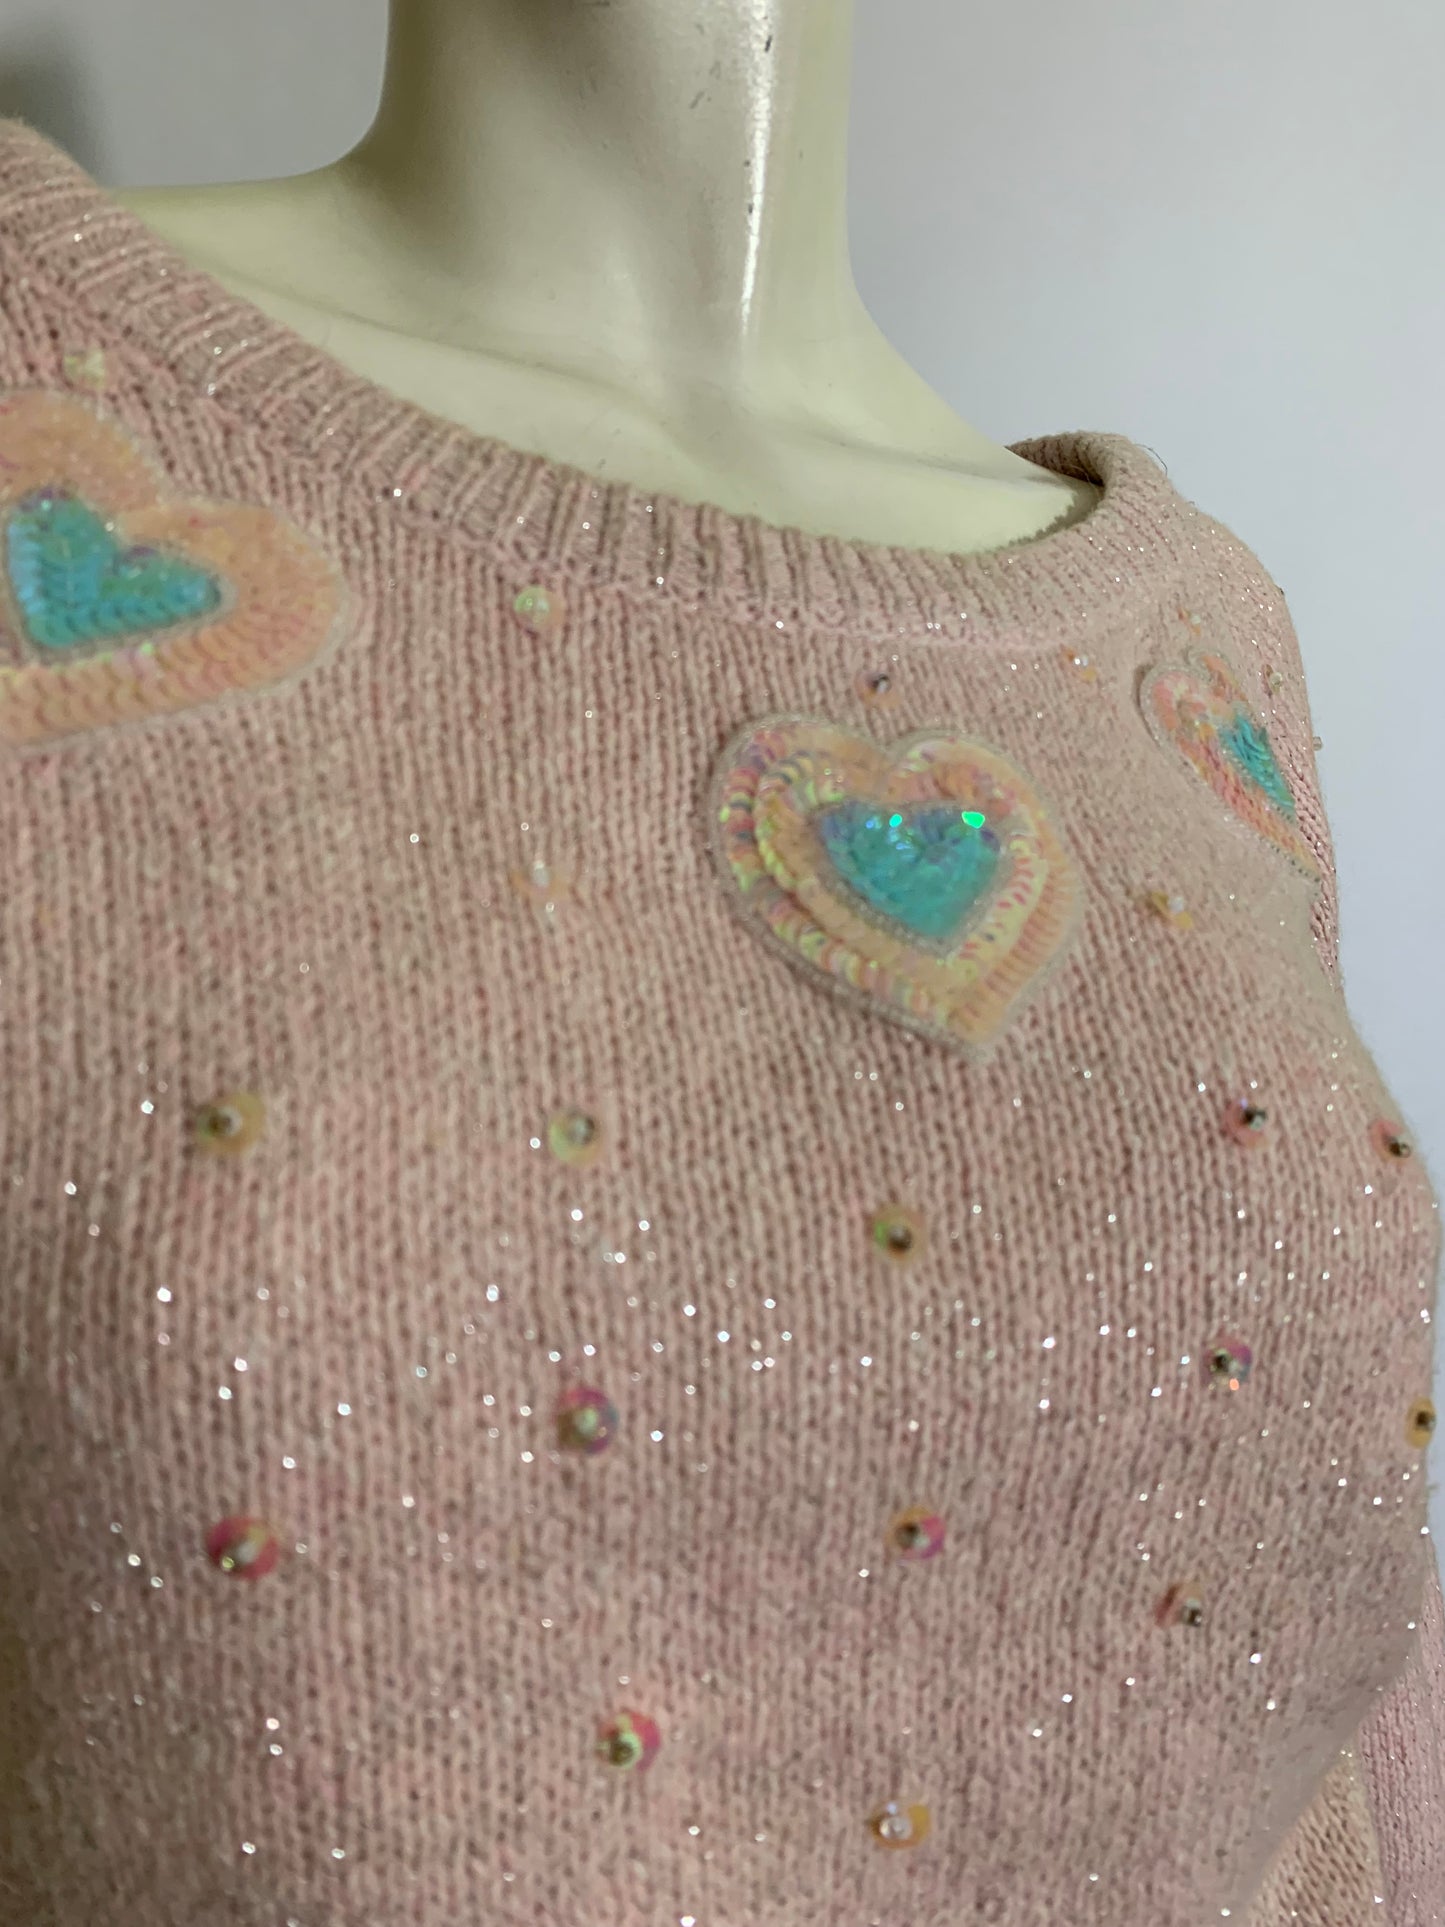 Baby Pink Angora Blend Sweater with Metallic Threads and Pastel Sequin Hearts circa 1980s